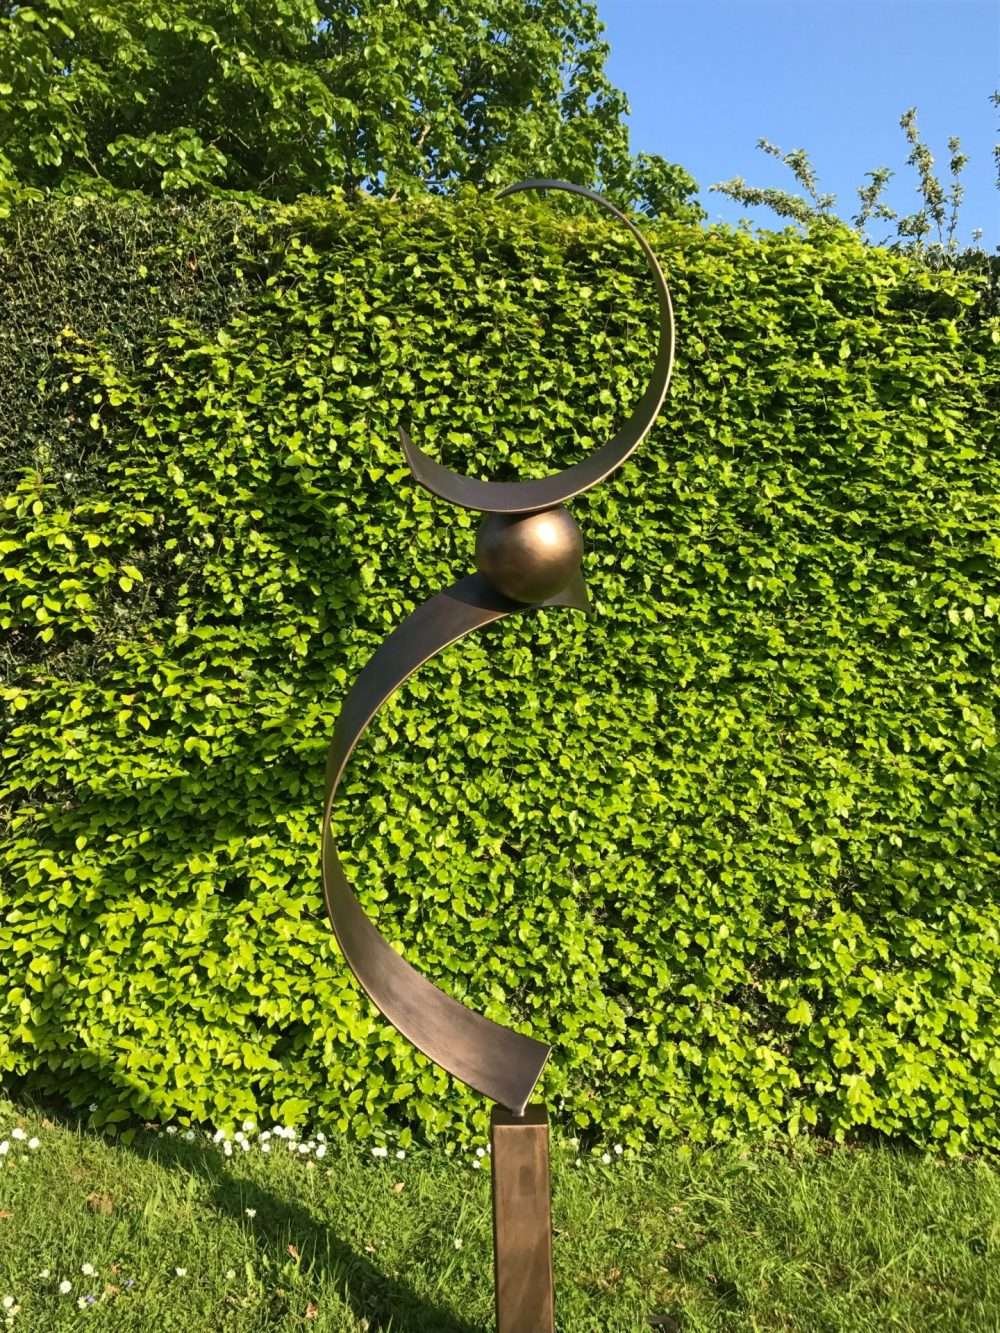 Abstract Brass Spiral Structure On A Sunny Day